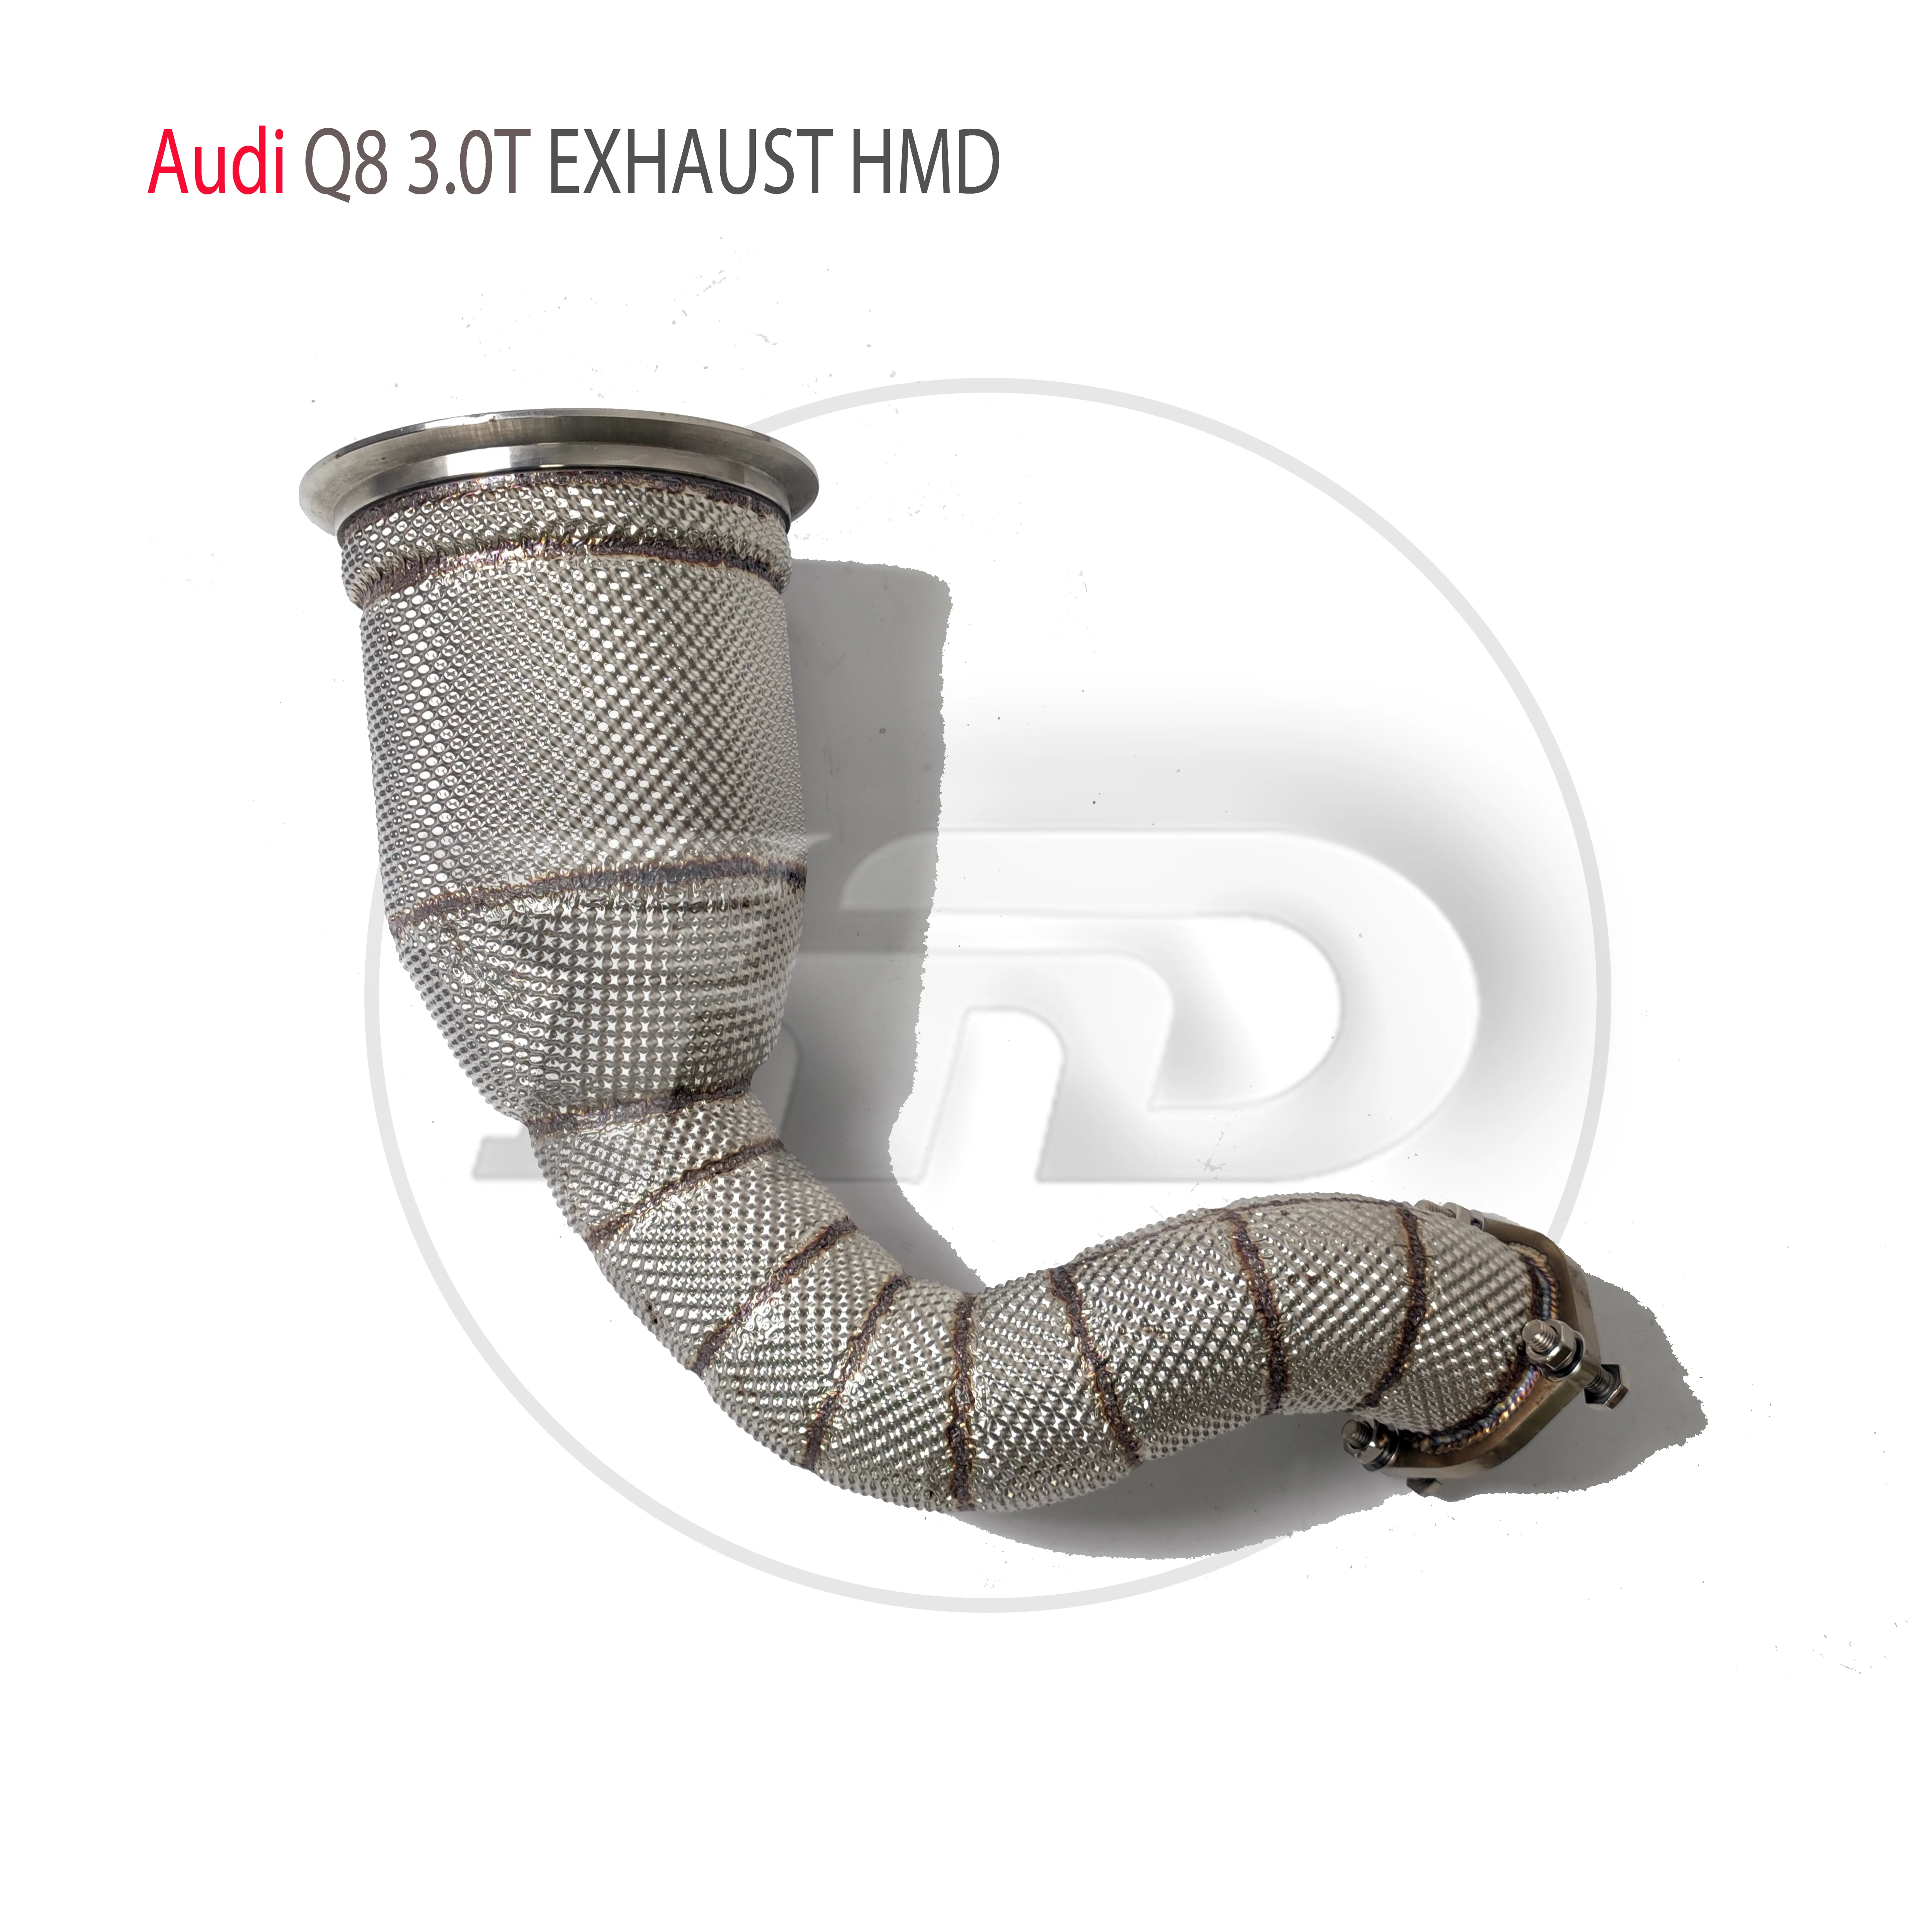 

HMD Exhaust Manifold High Flow Downpipe for Audi Q8 3.0T Car Accessories With Catalytic Header Without Cat Catless Pipe